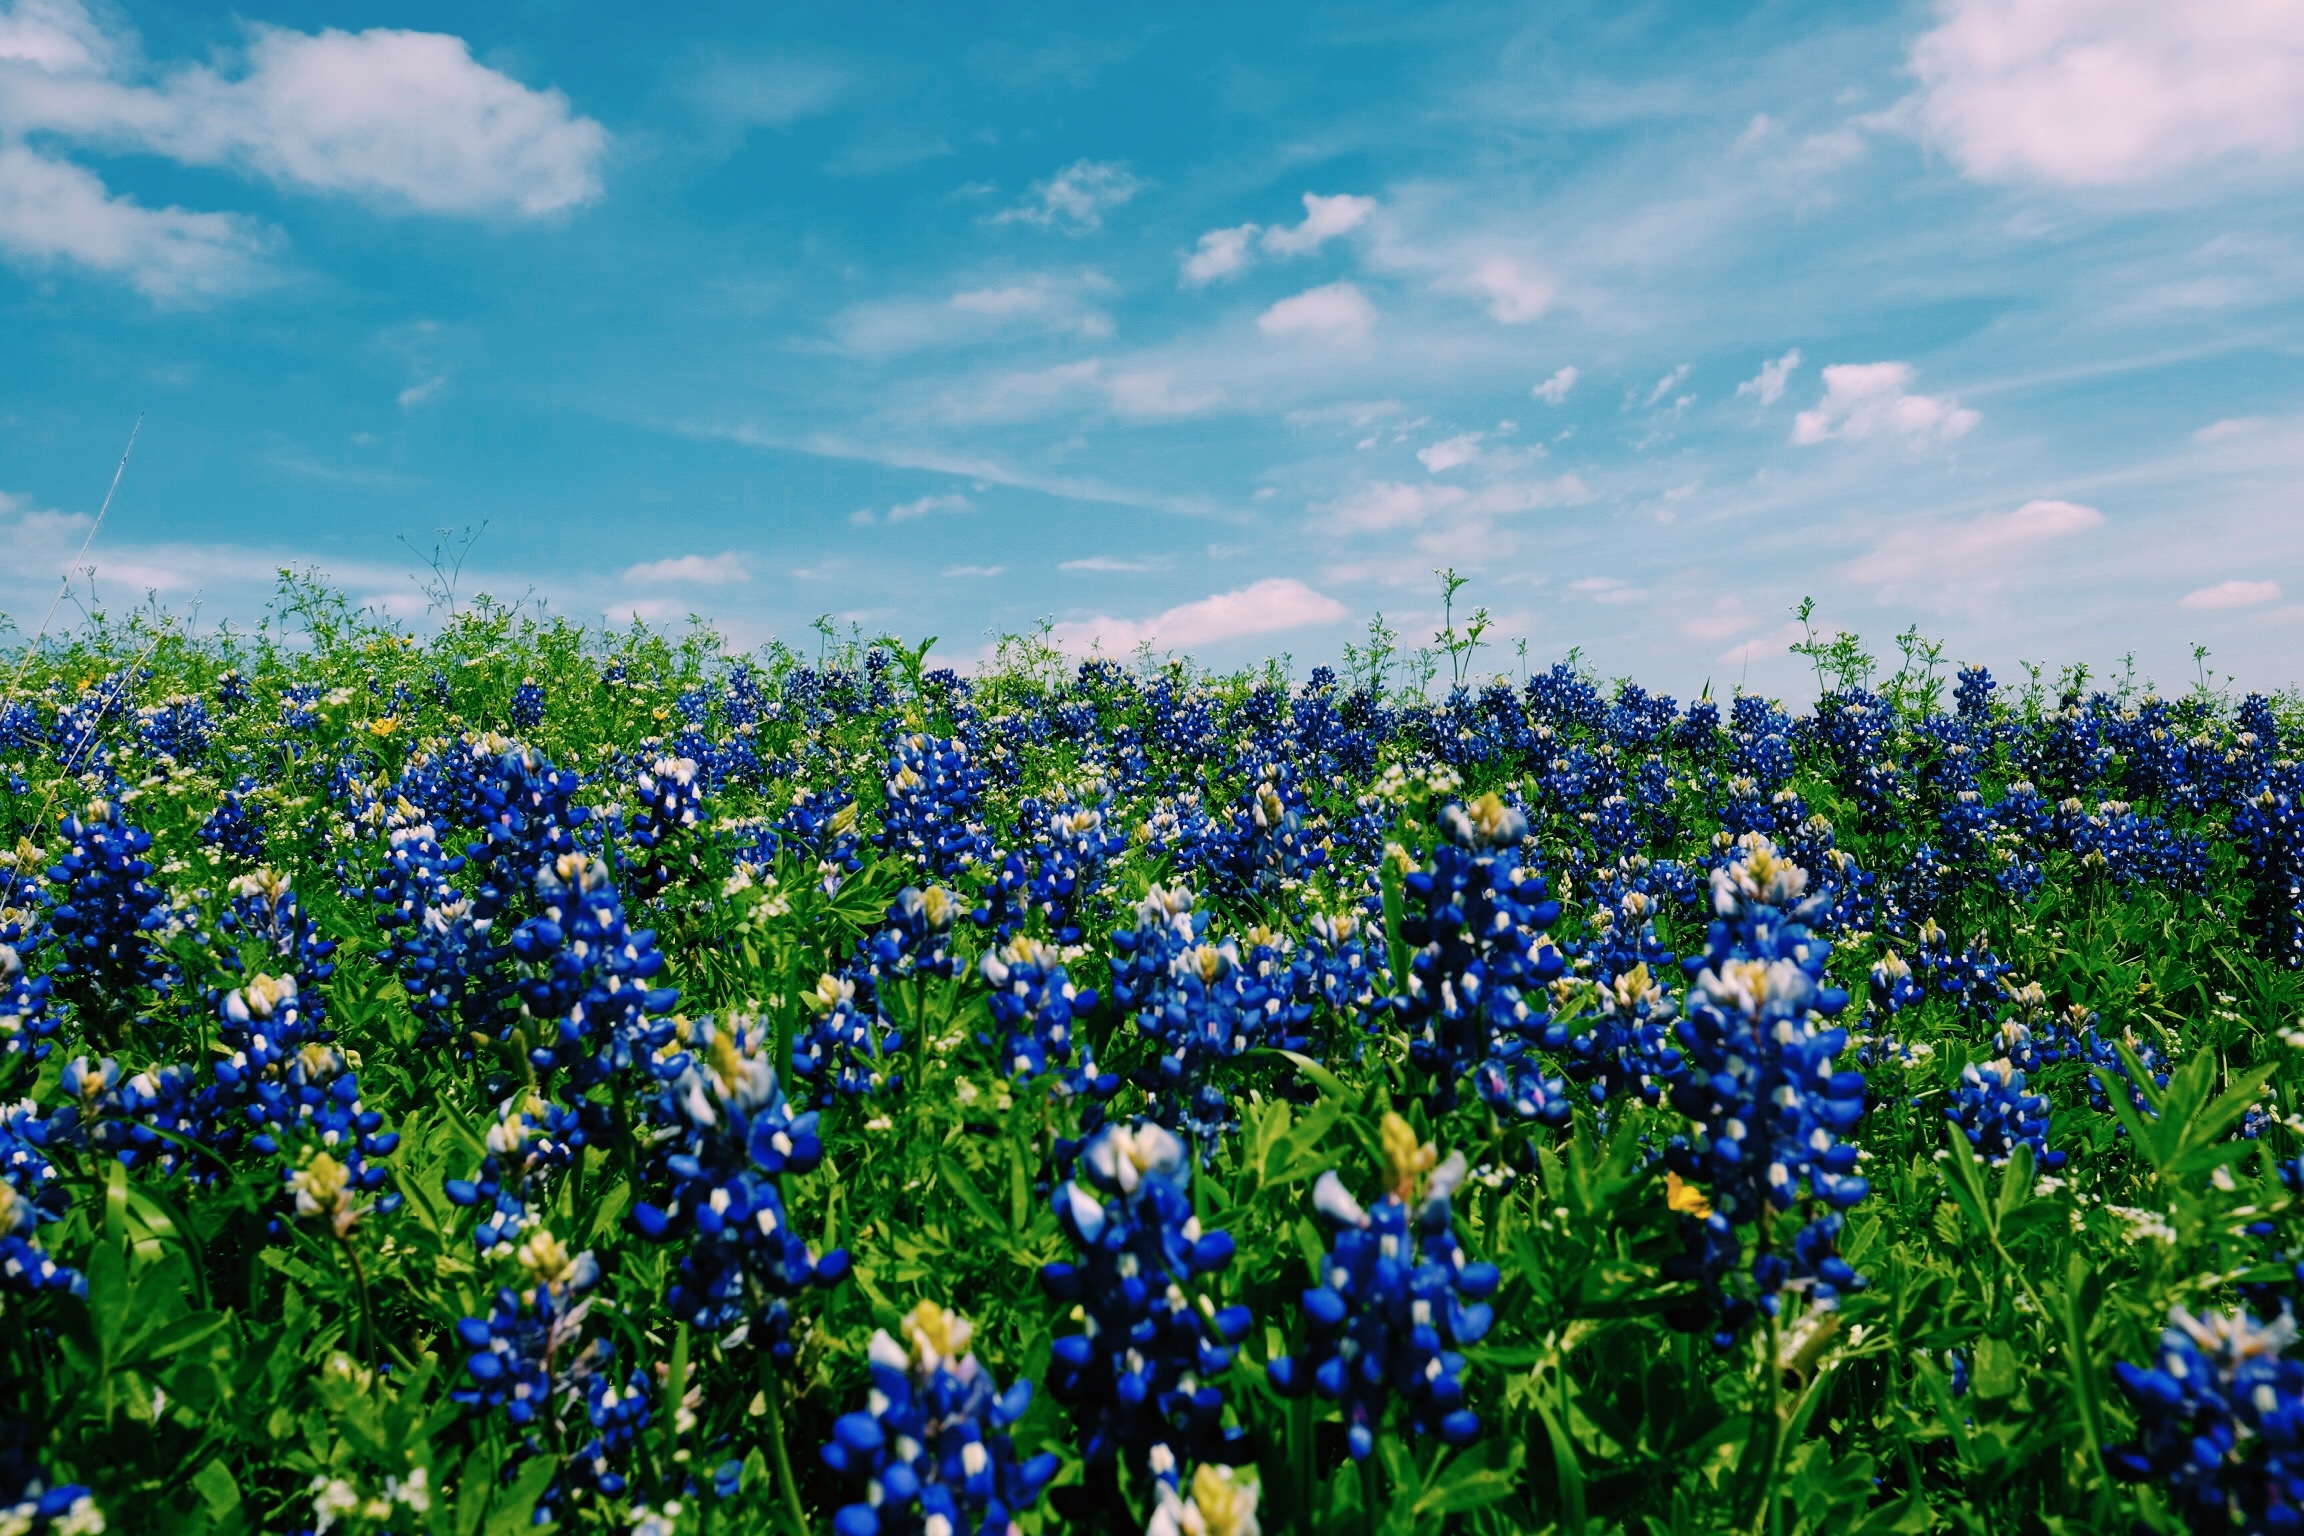 A large field of blue flowers